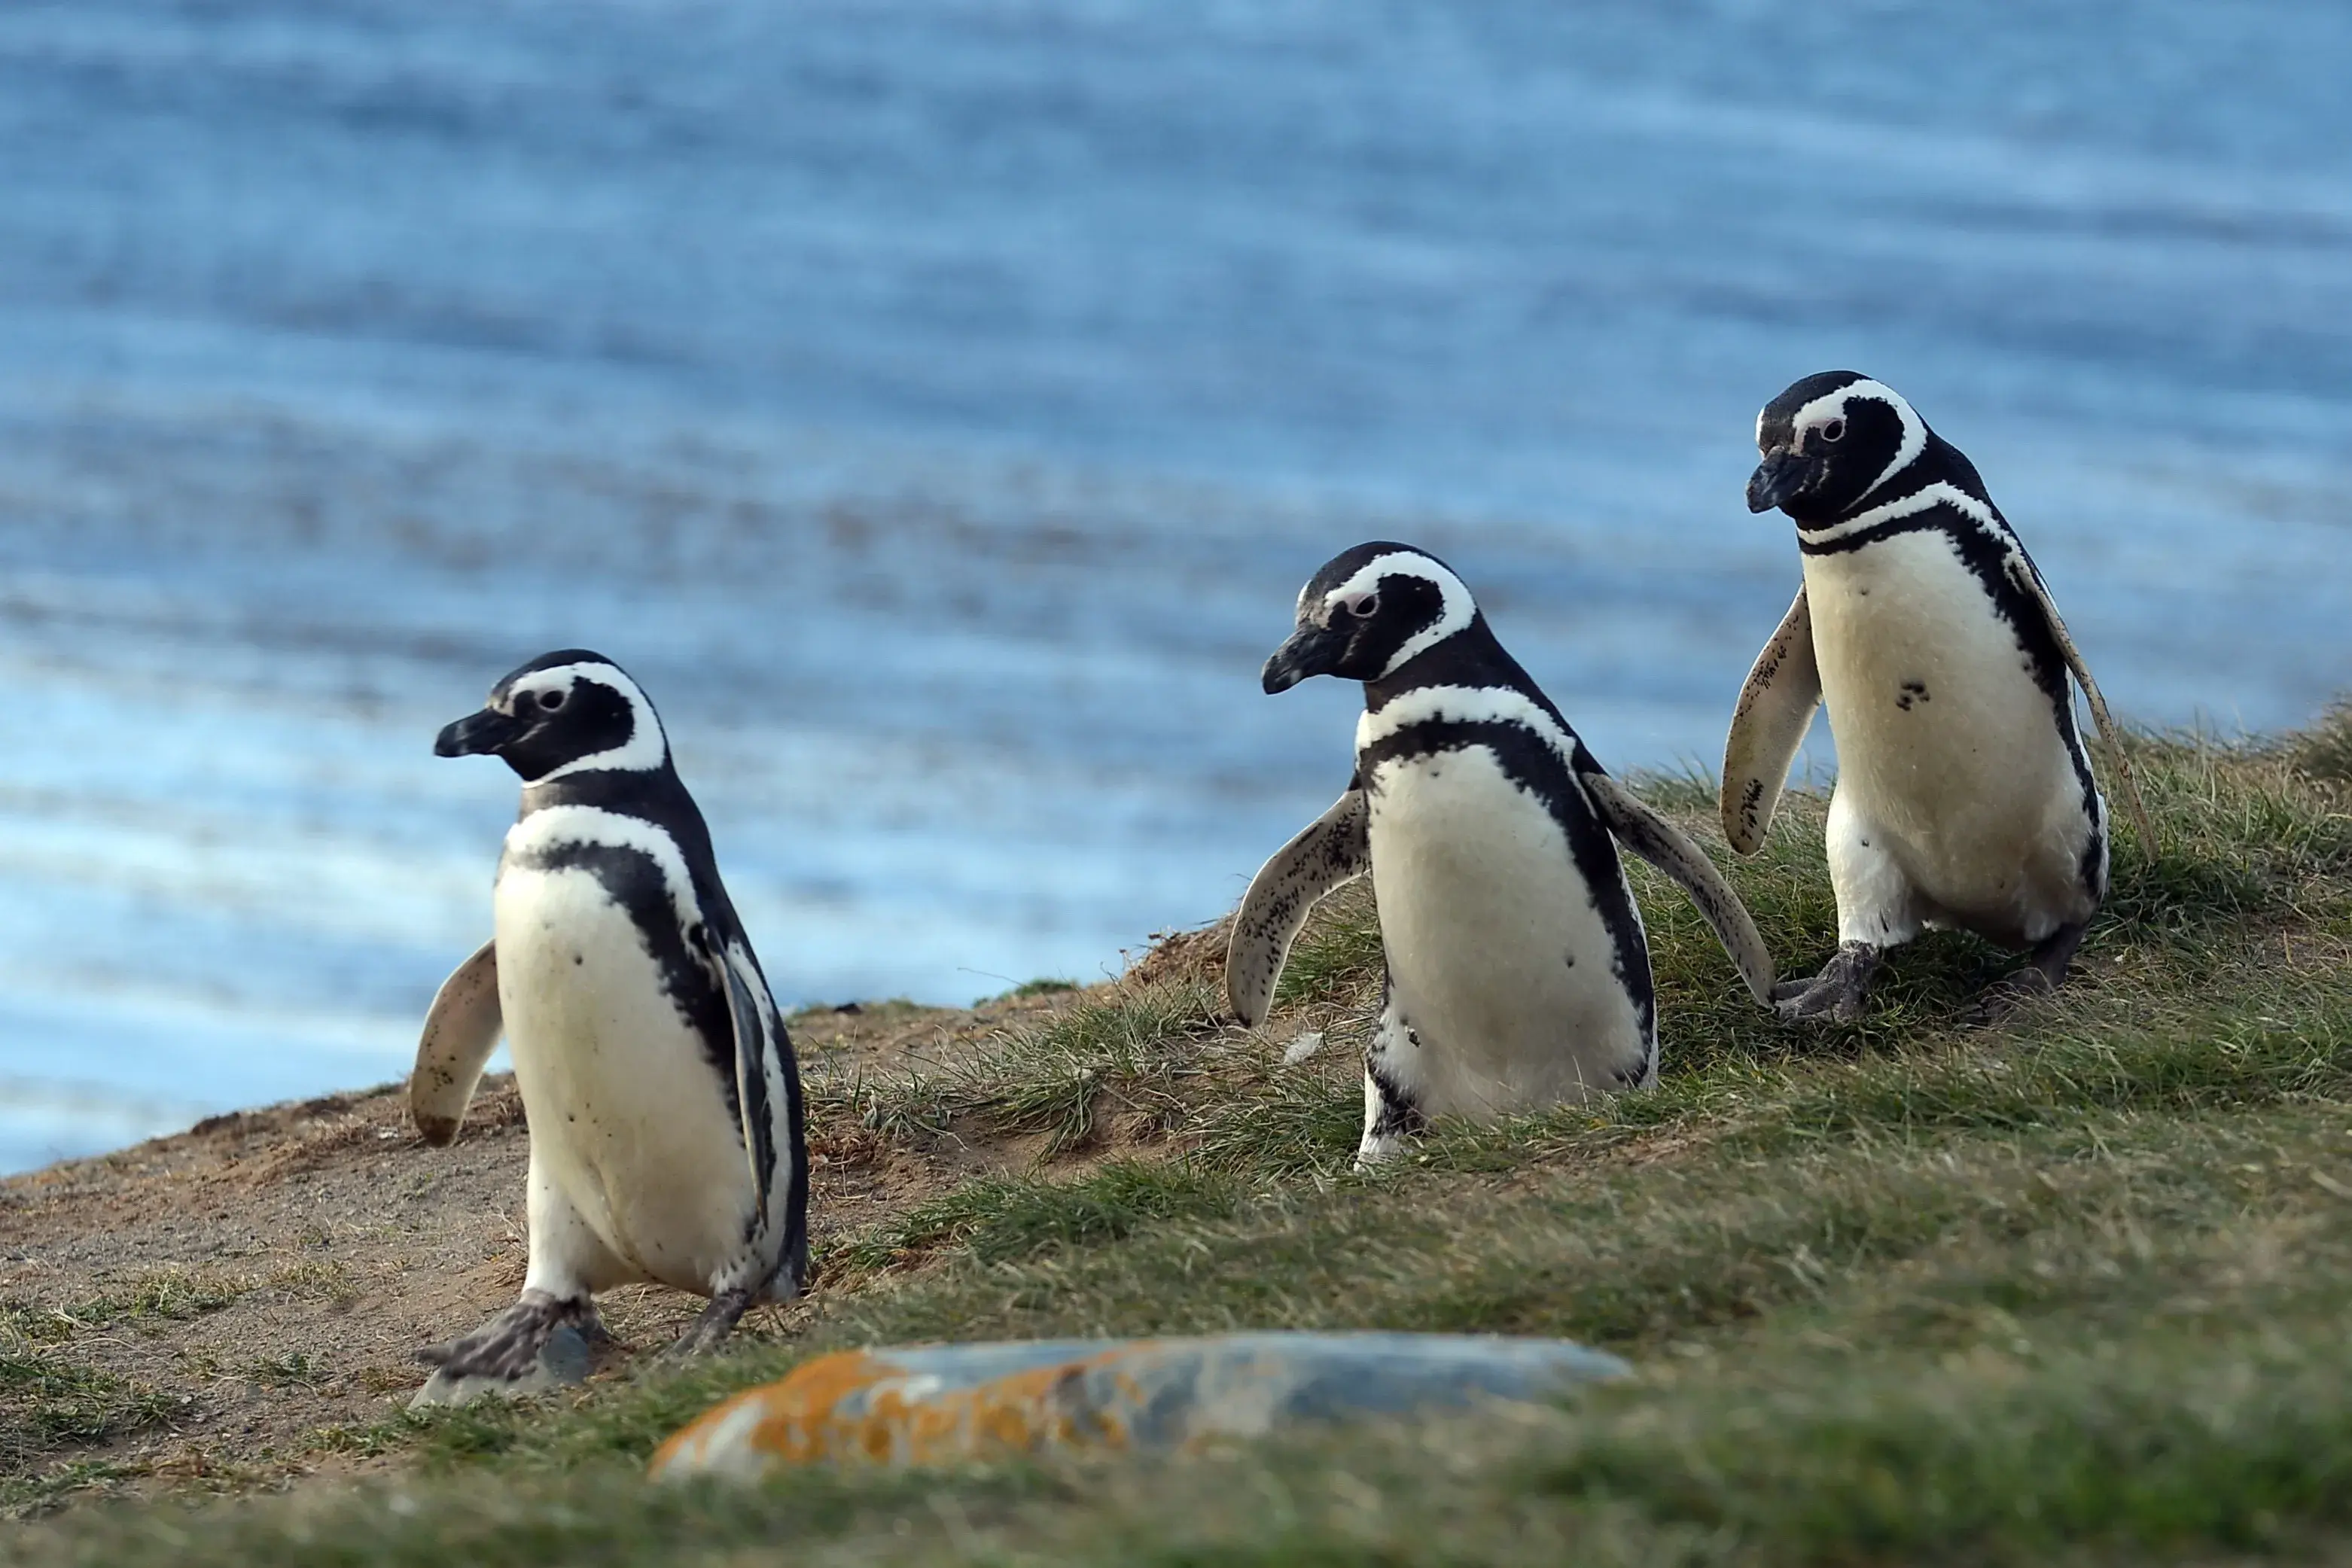 The Penguins of Magdalena Island